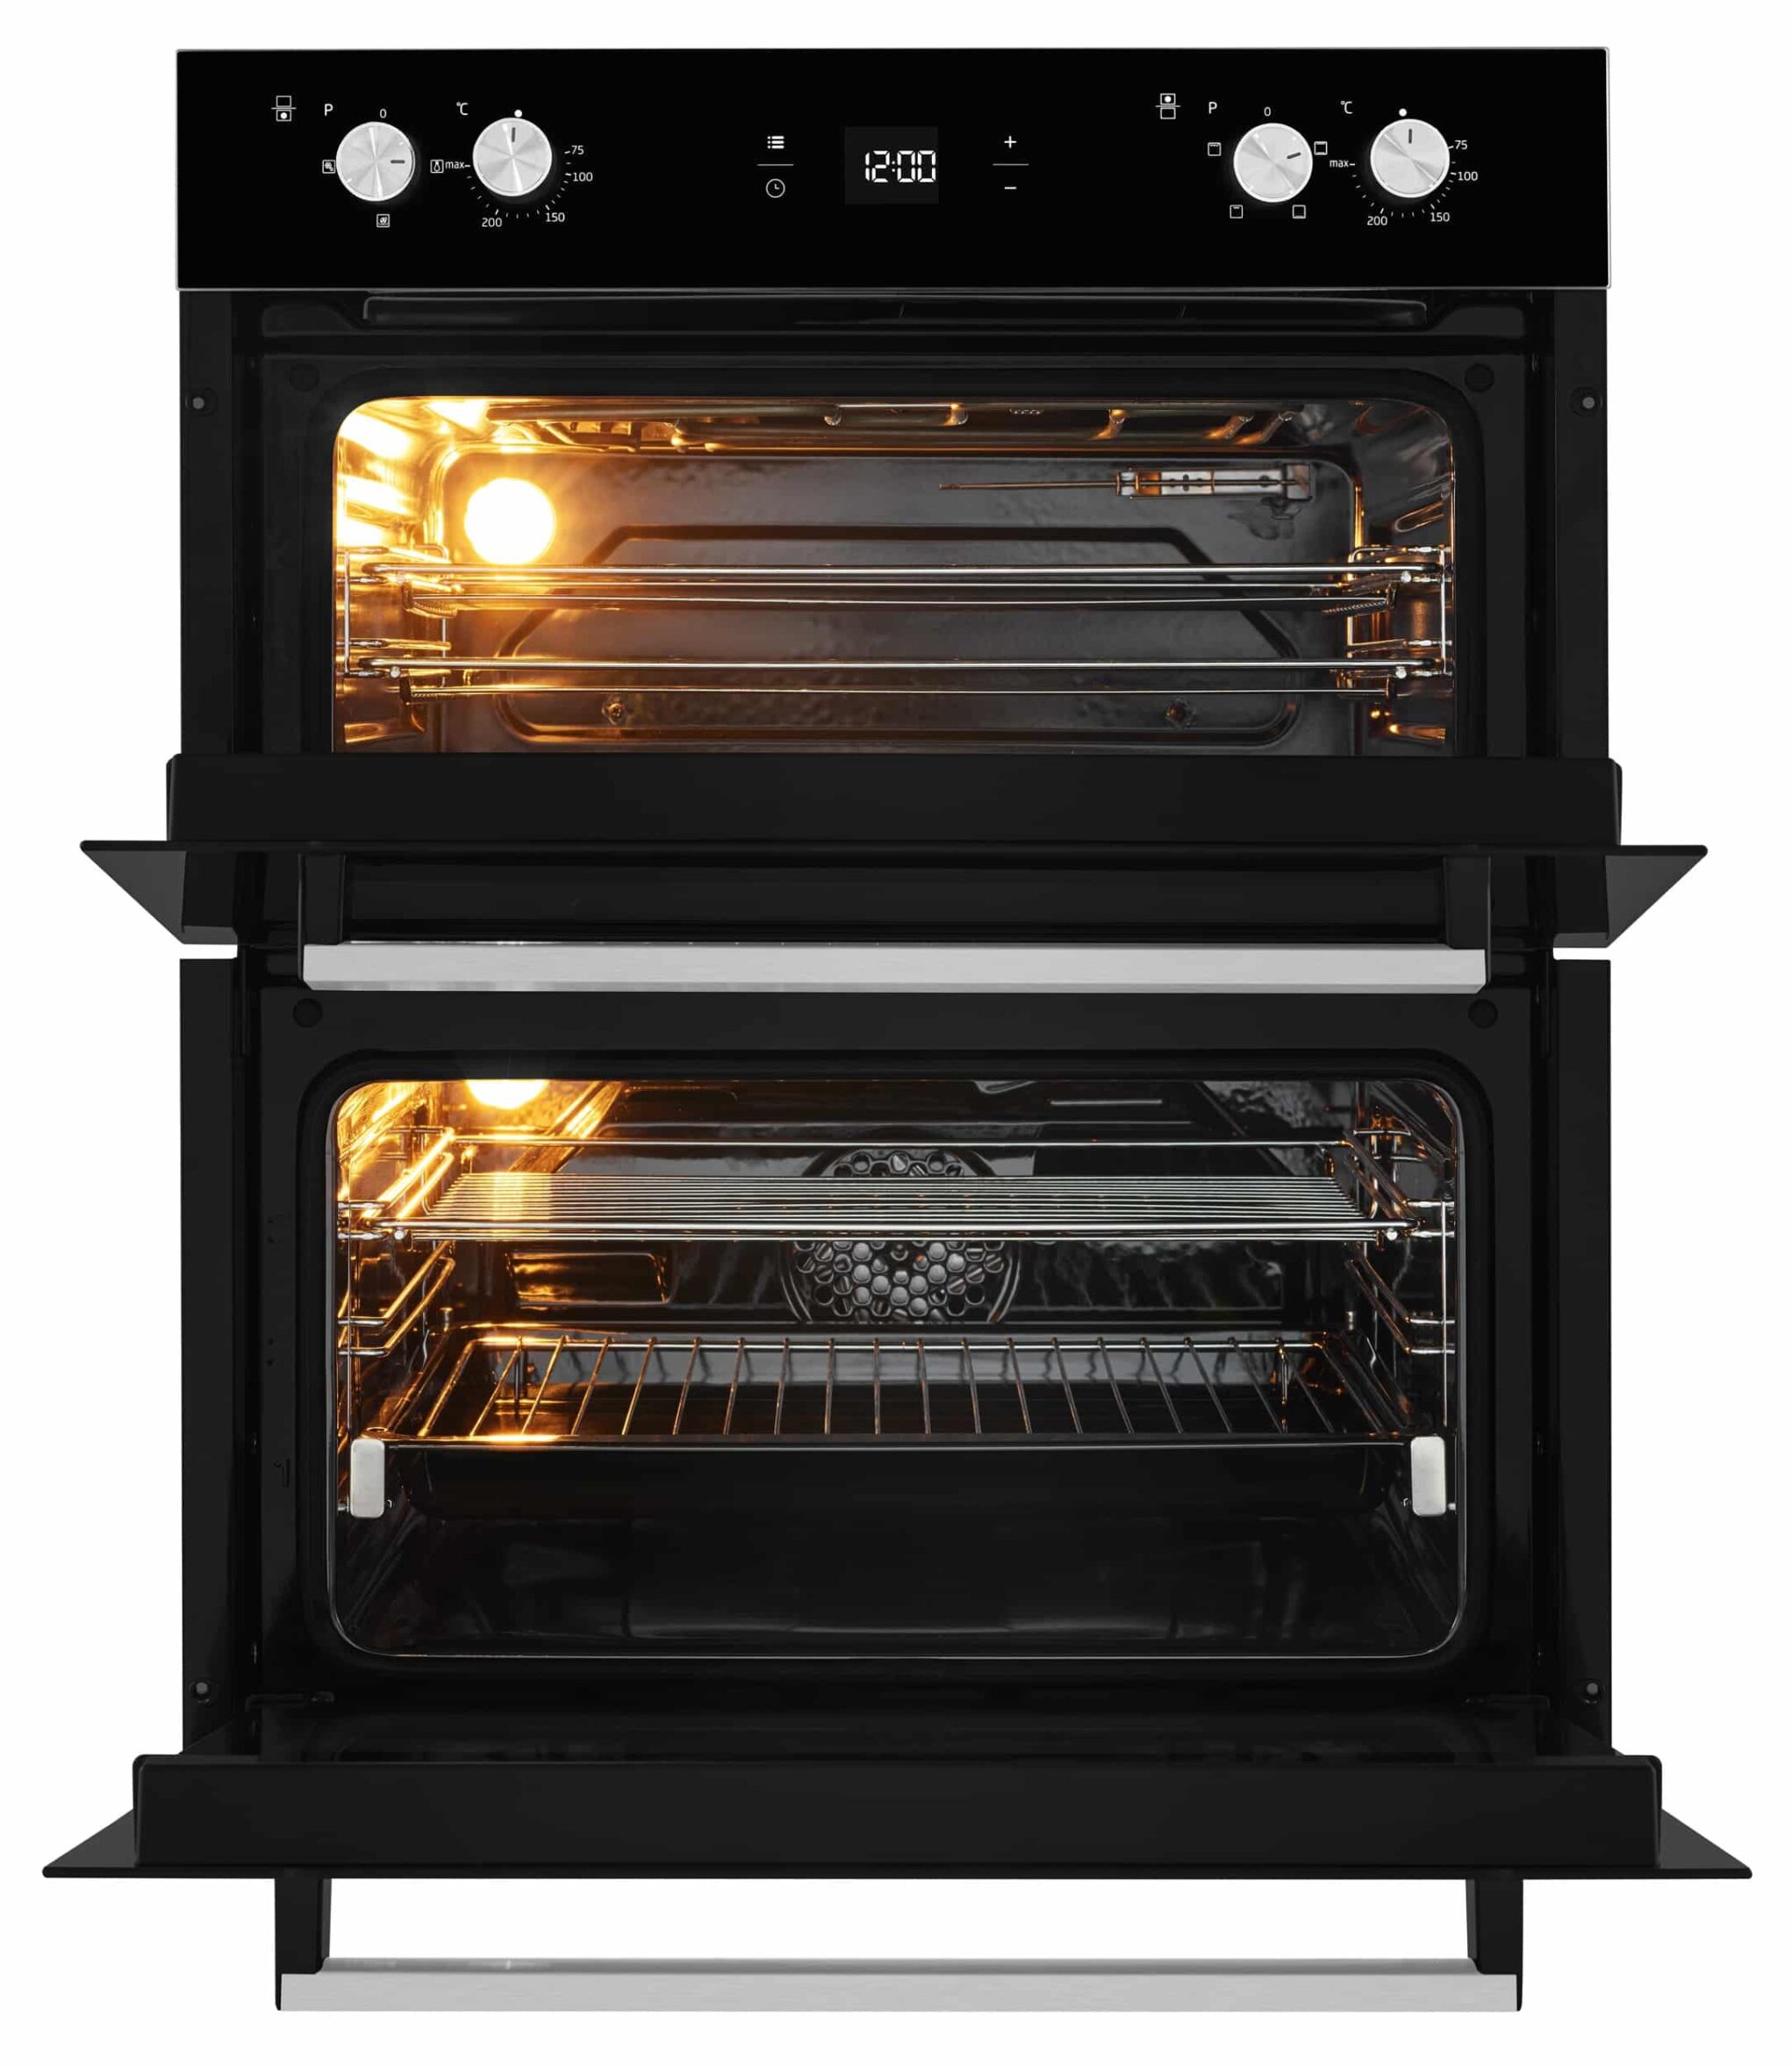 Beko BDQF24300B Black Glass & stainless steel Built-in Double oven 0473